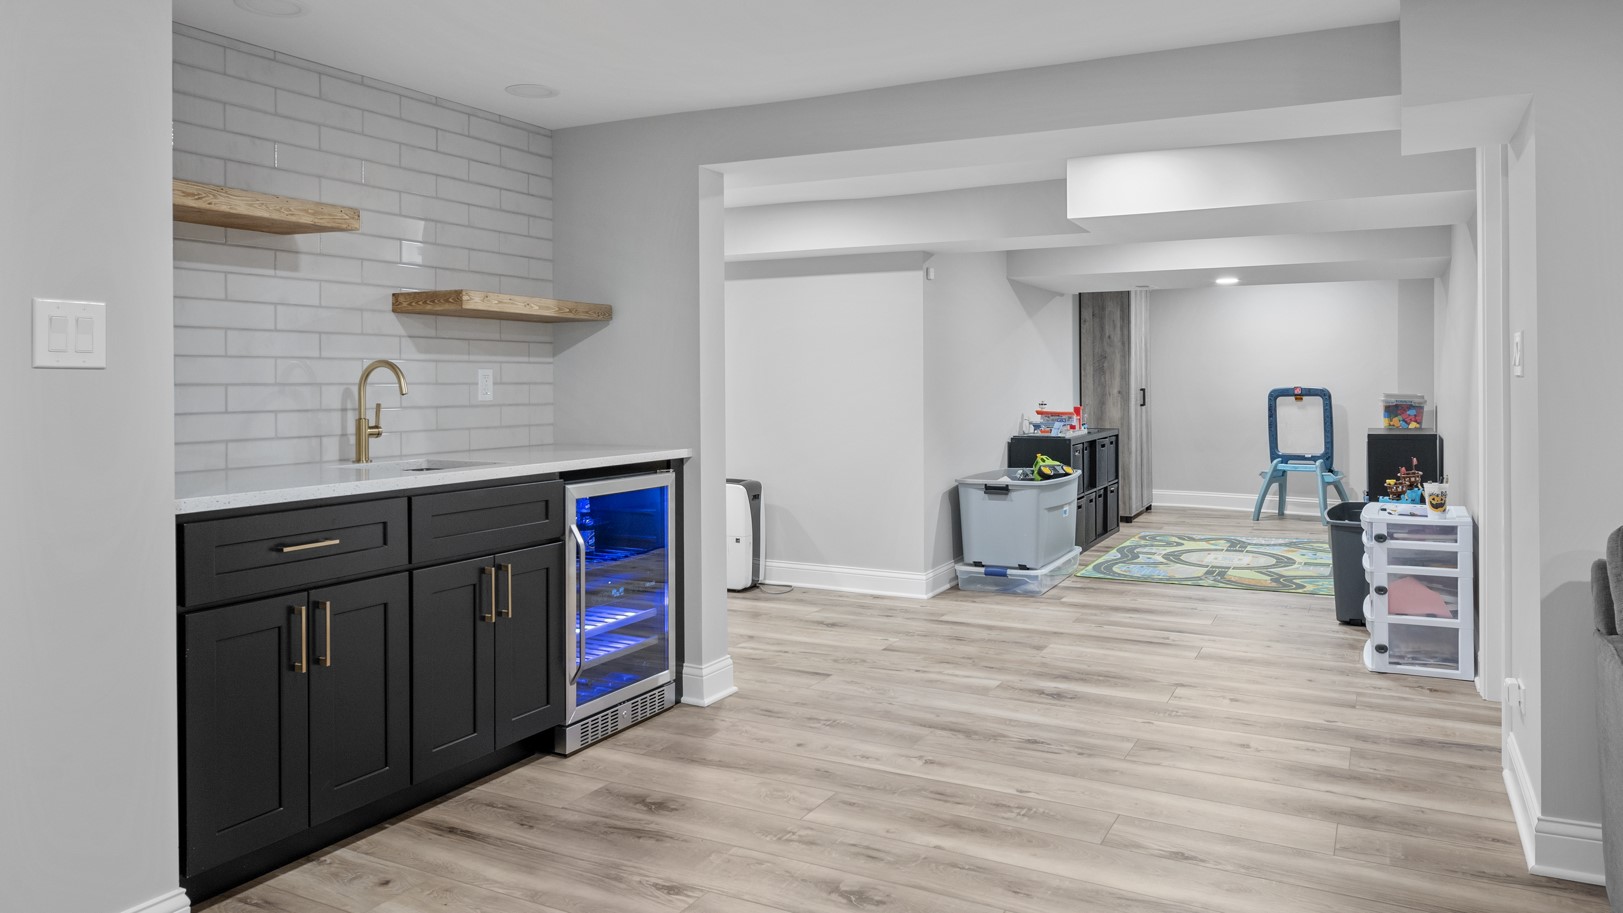 Luxury basement remodel by the 4Ever Remodeling team in Oak Park, IL | New laminate floors and beautiful dark wood cabinets and children’s play space